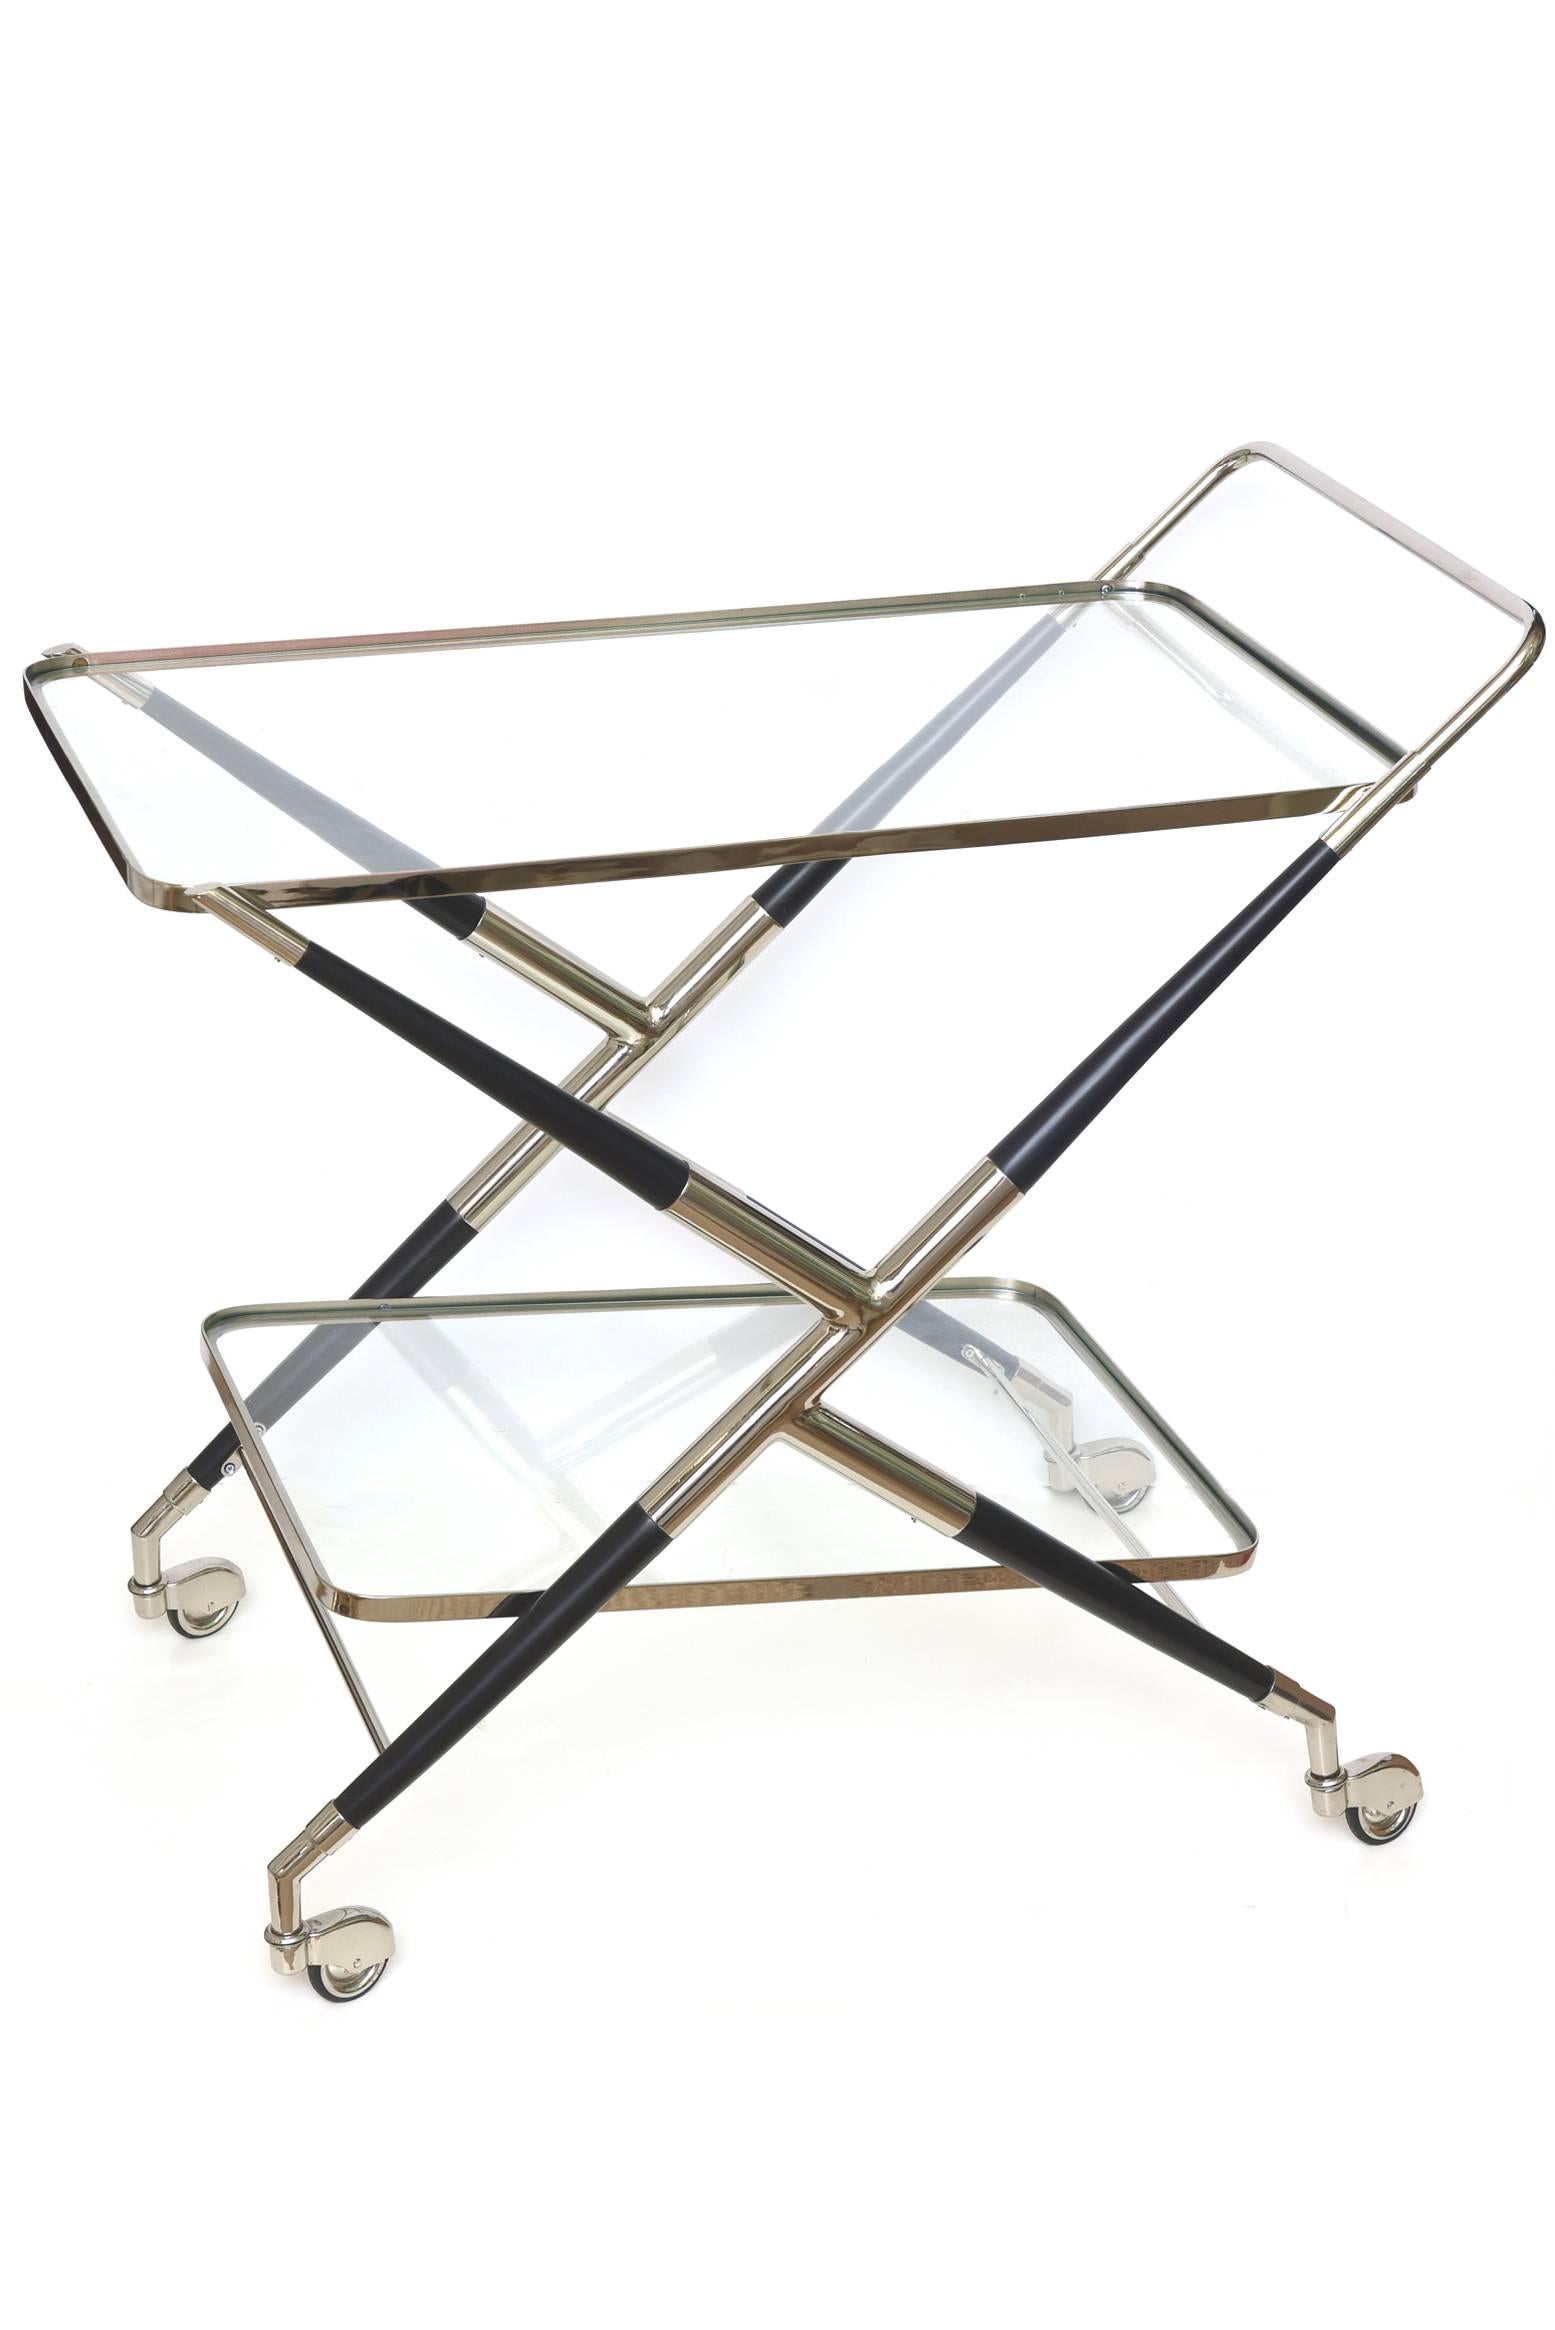 This Mid-Century Modern newly restored Cesare Lacca X-frame two-tiered bar cart is Italian and hallmarked made in Italy Mod Dept Cesare Lacca. The original wheels that also have been nickeled silver are very chic. This entire bar cart has been